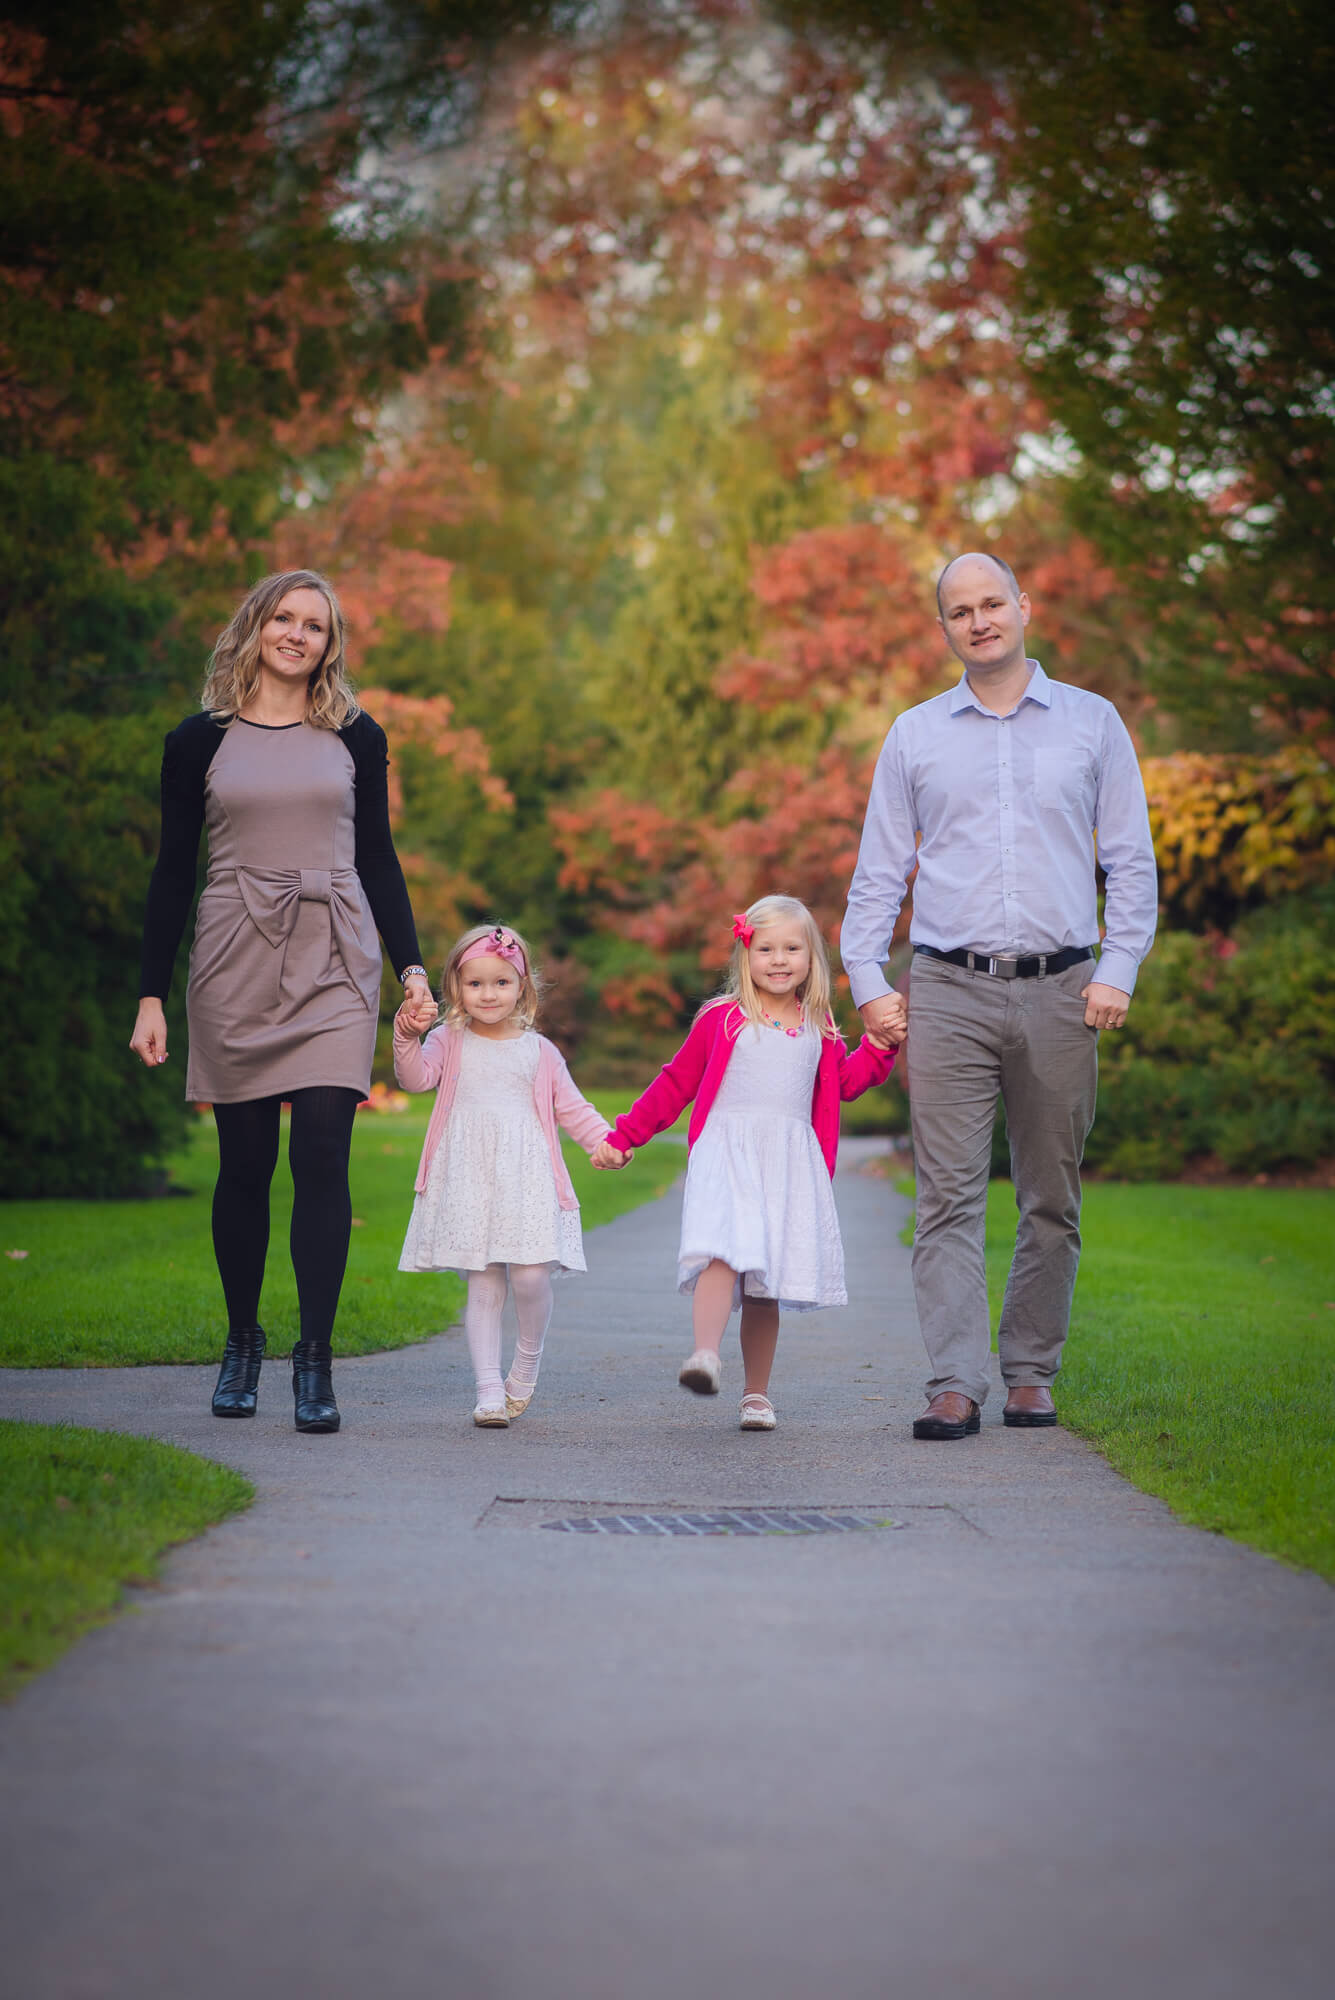 Beautiful Family pictures by Franctal Studio: Top Photographer serving Surrey, Langley, Burnaby, Coquitlam and throughout the lower Mainland